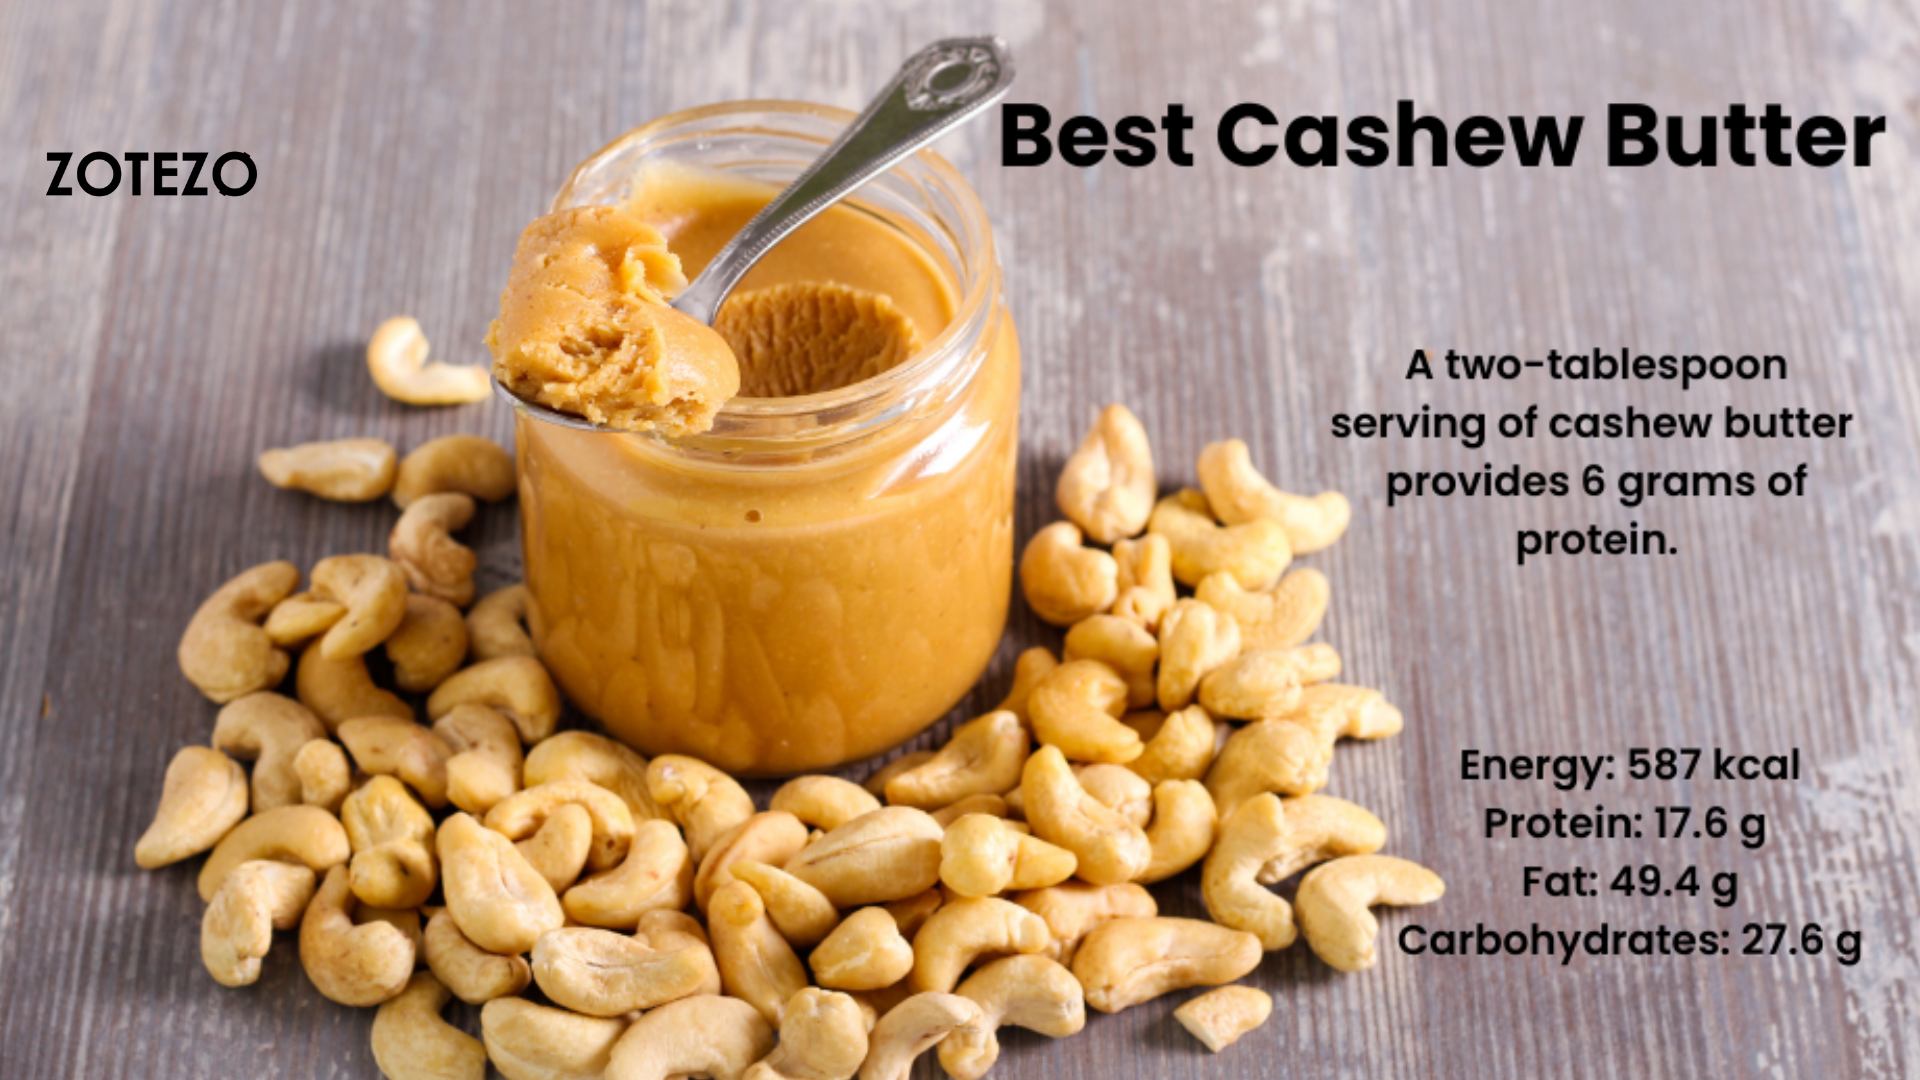 Cashew Butter in the World